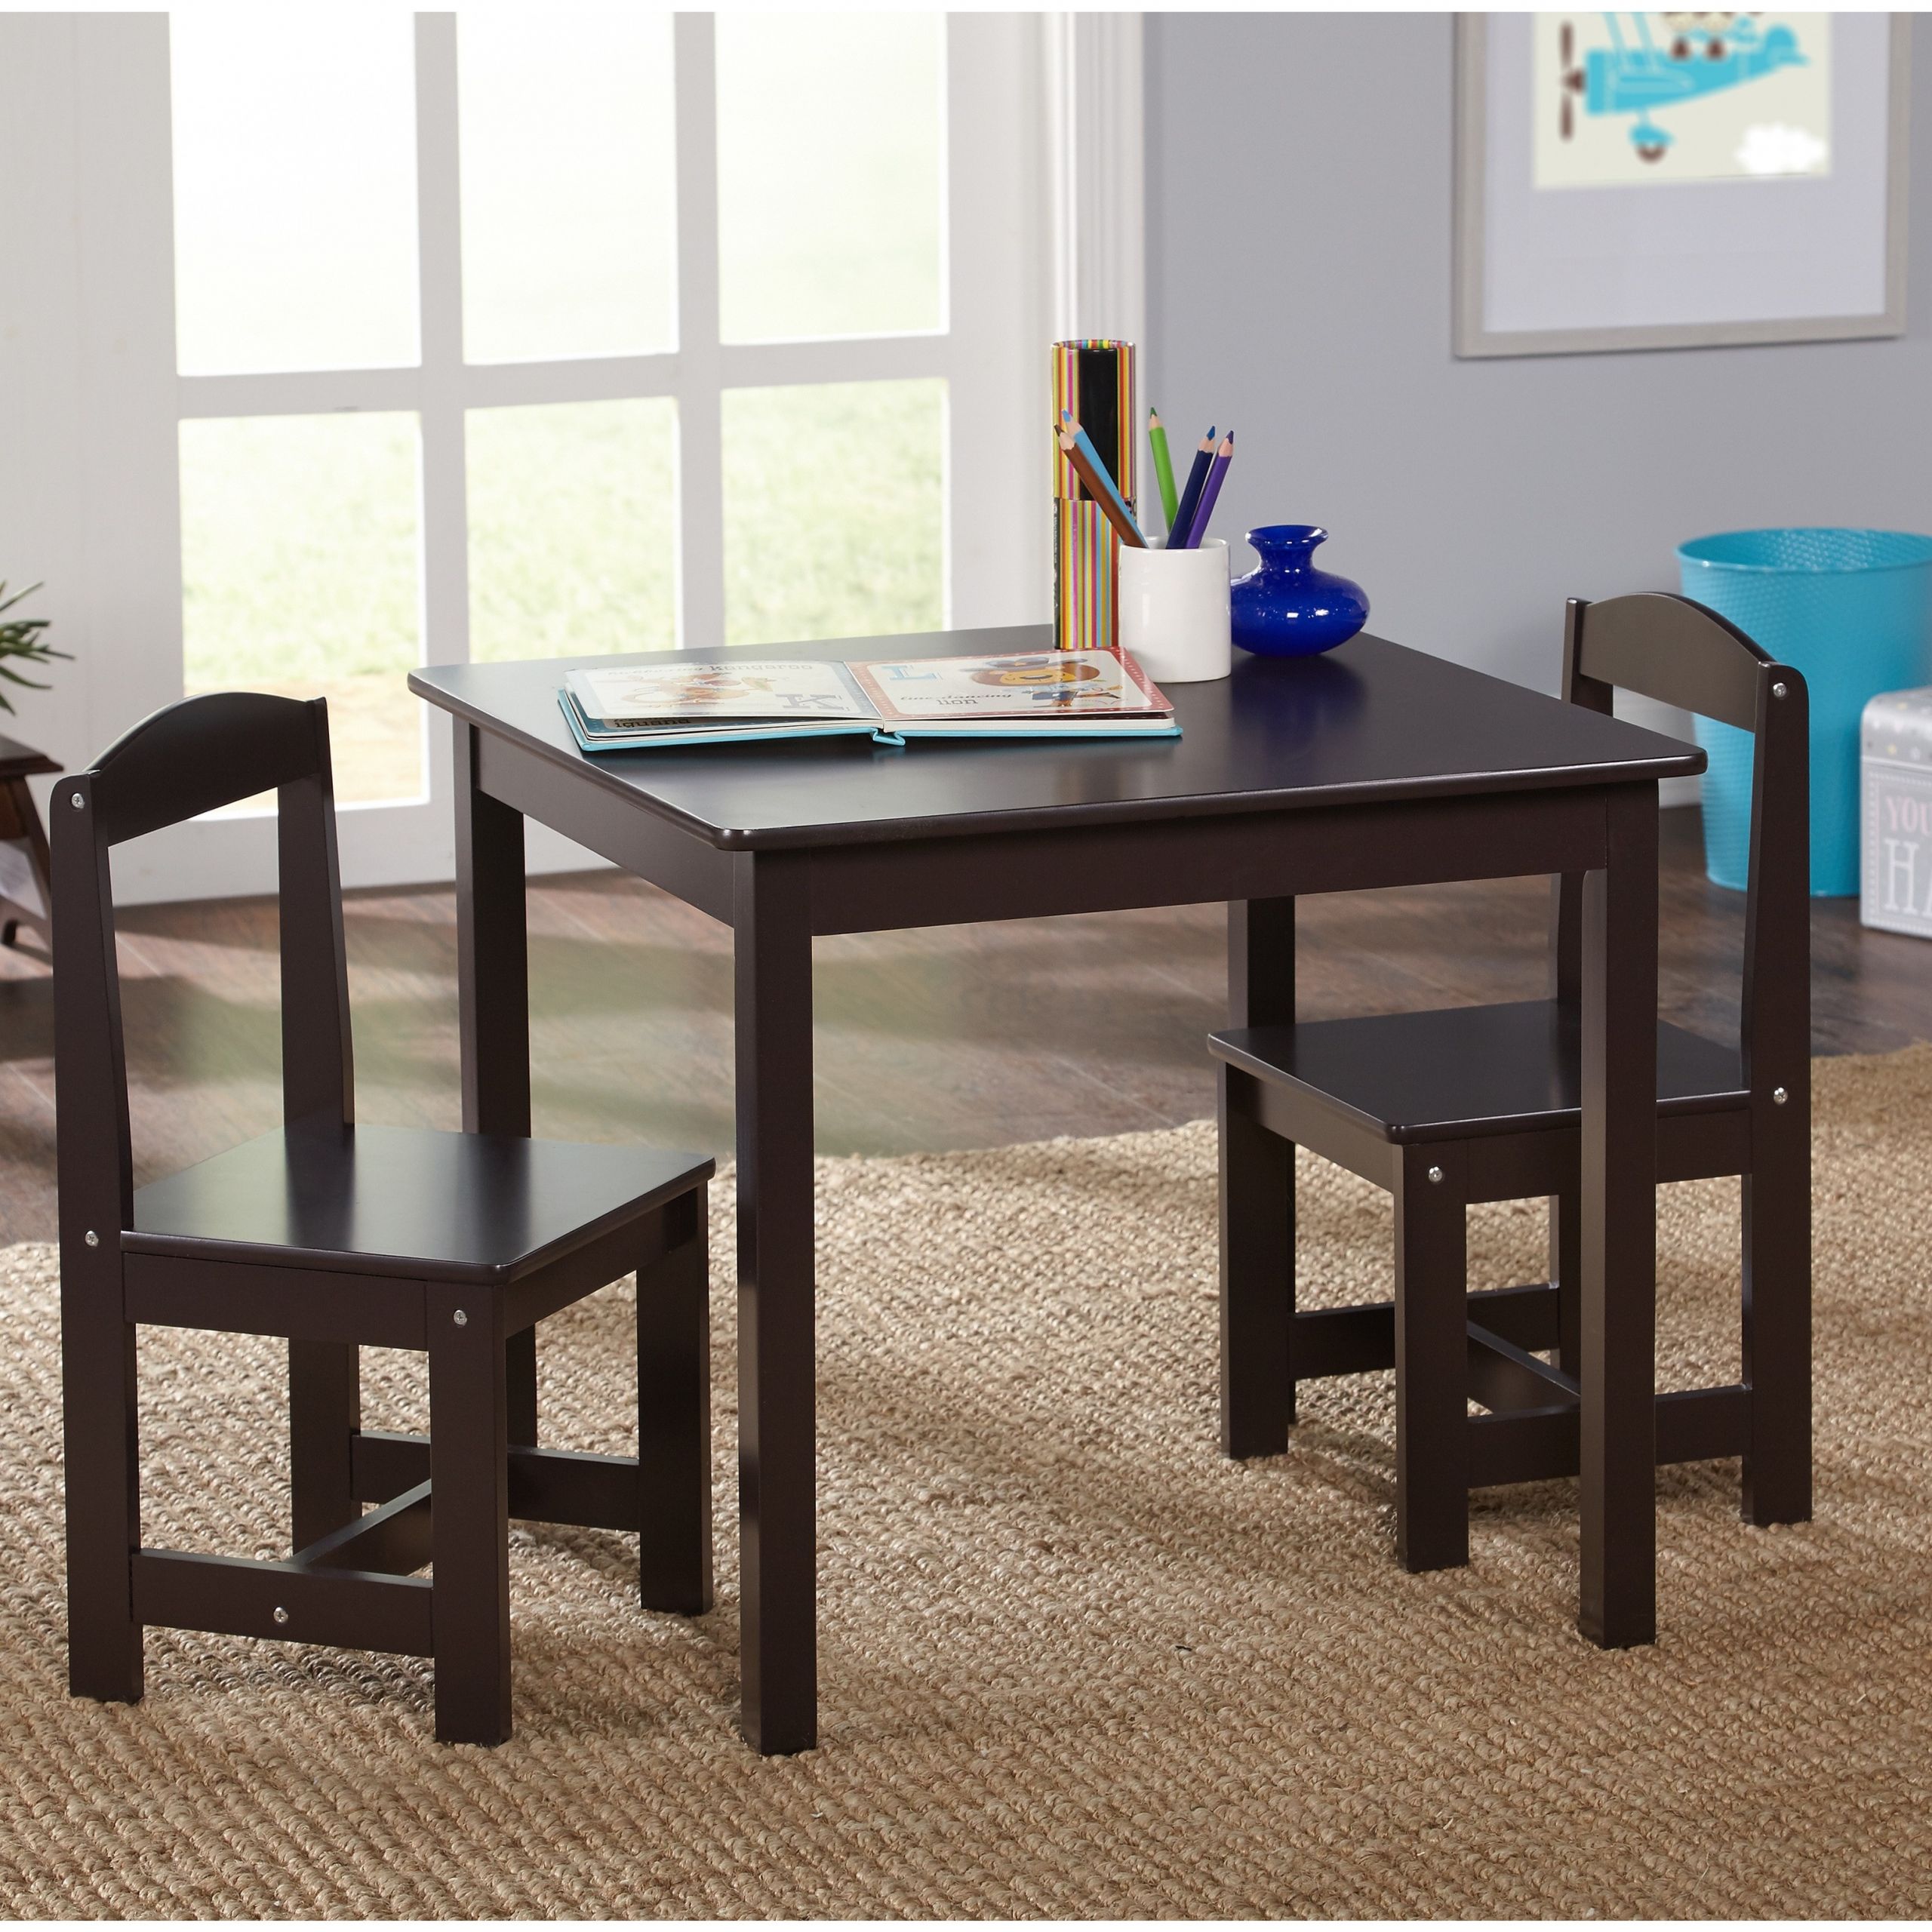 Kids Table And Bench Set
 Hayden Kids 3 Piece Table and Chair Set Multiple Colors